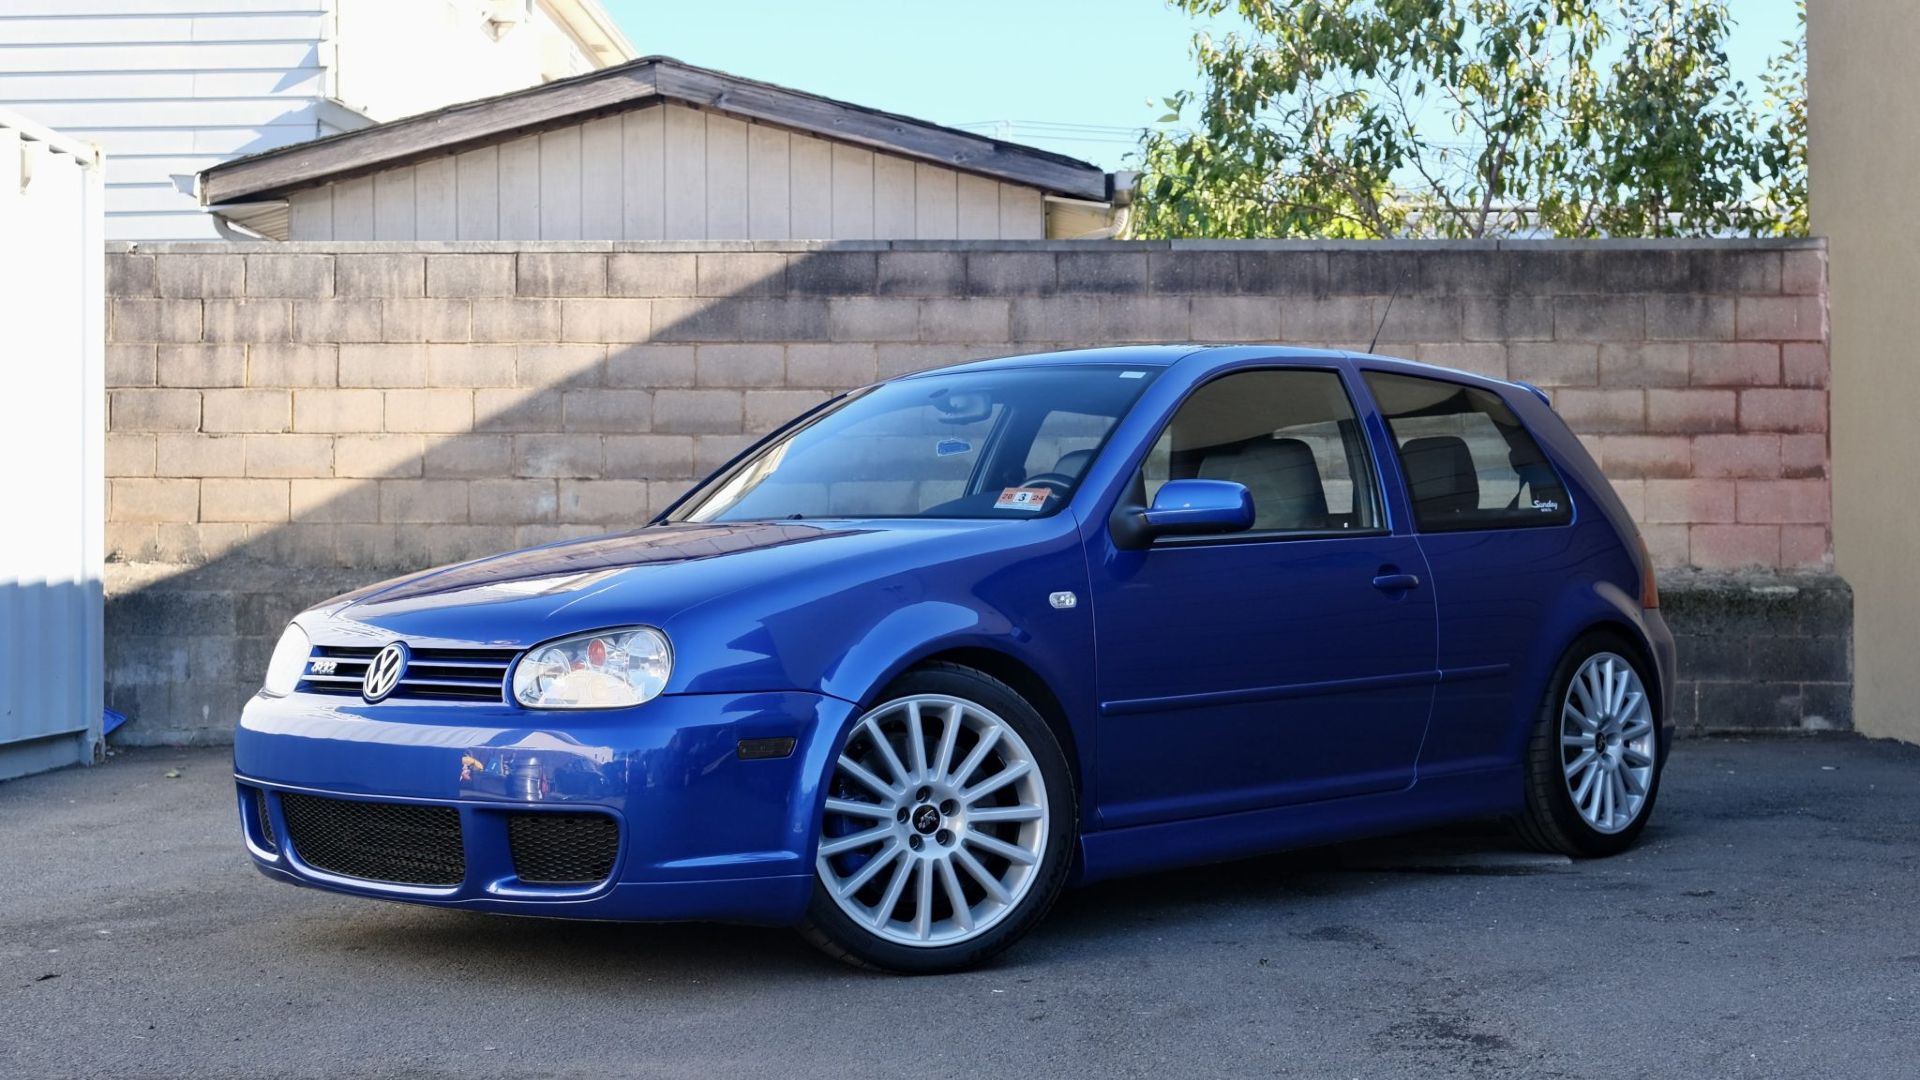 10 Reasons Why The 2004 Volkswagen Golf R32 Was The Coolest Hatchback